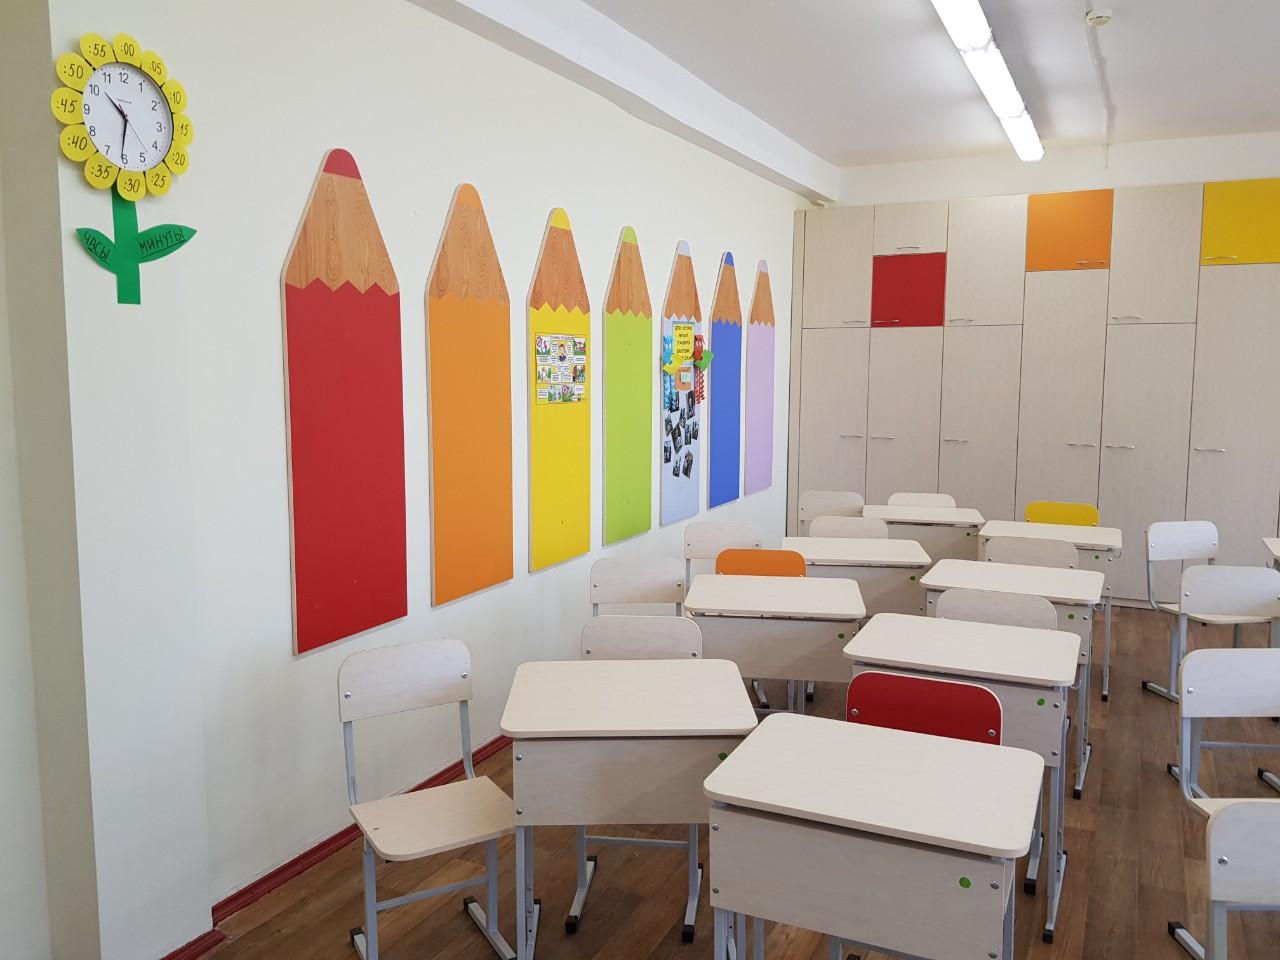 How to decorate the walls of school classrooms?